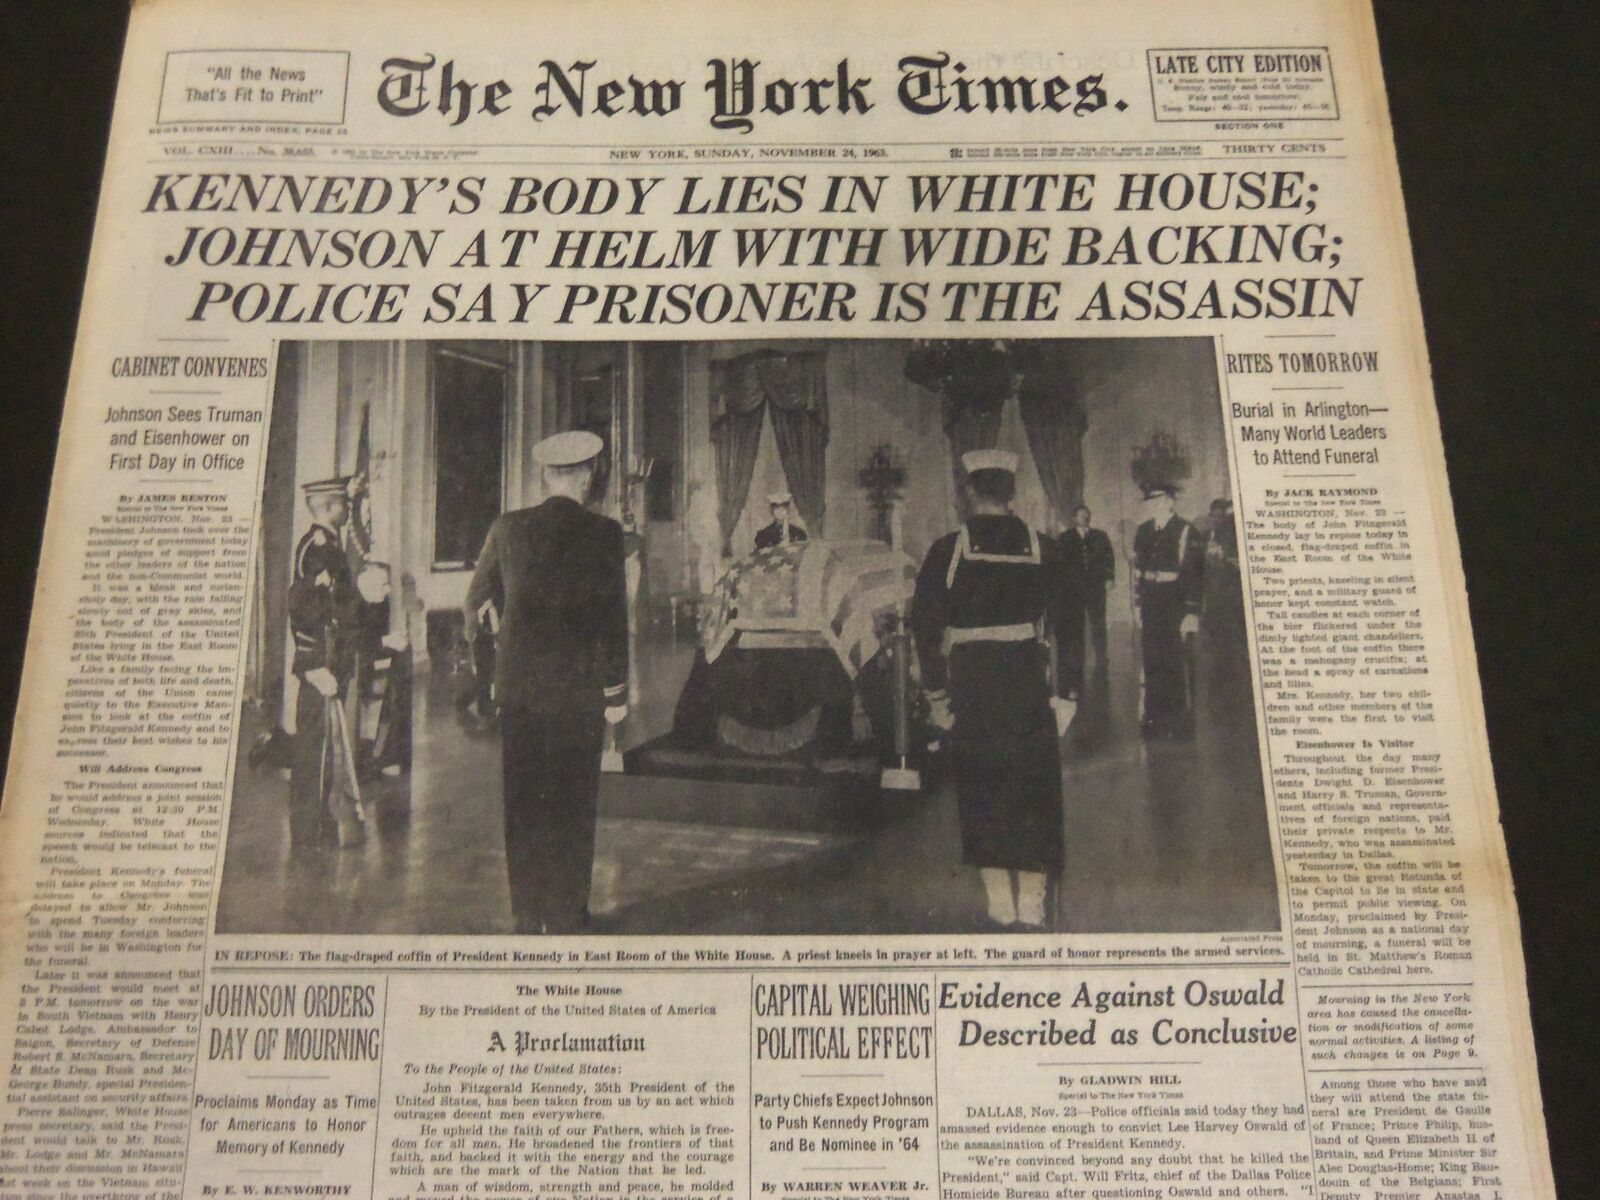 1963 NOVEMBER 24 NEW YORK TIMES - KENNEDY\'S BODY LIES IN WHITE HOUSE - NT 7172